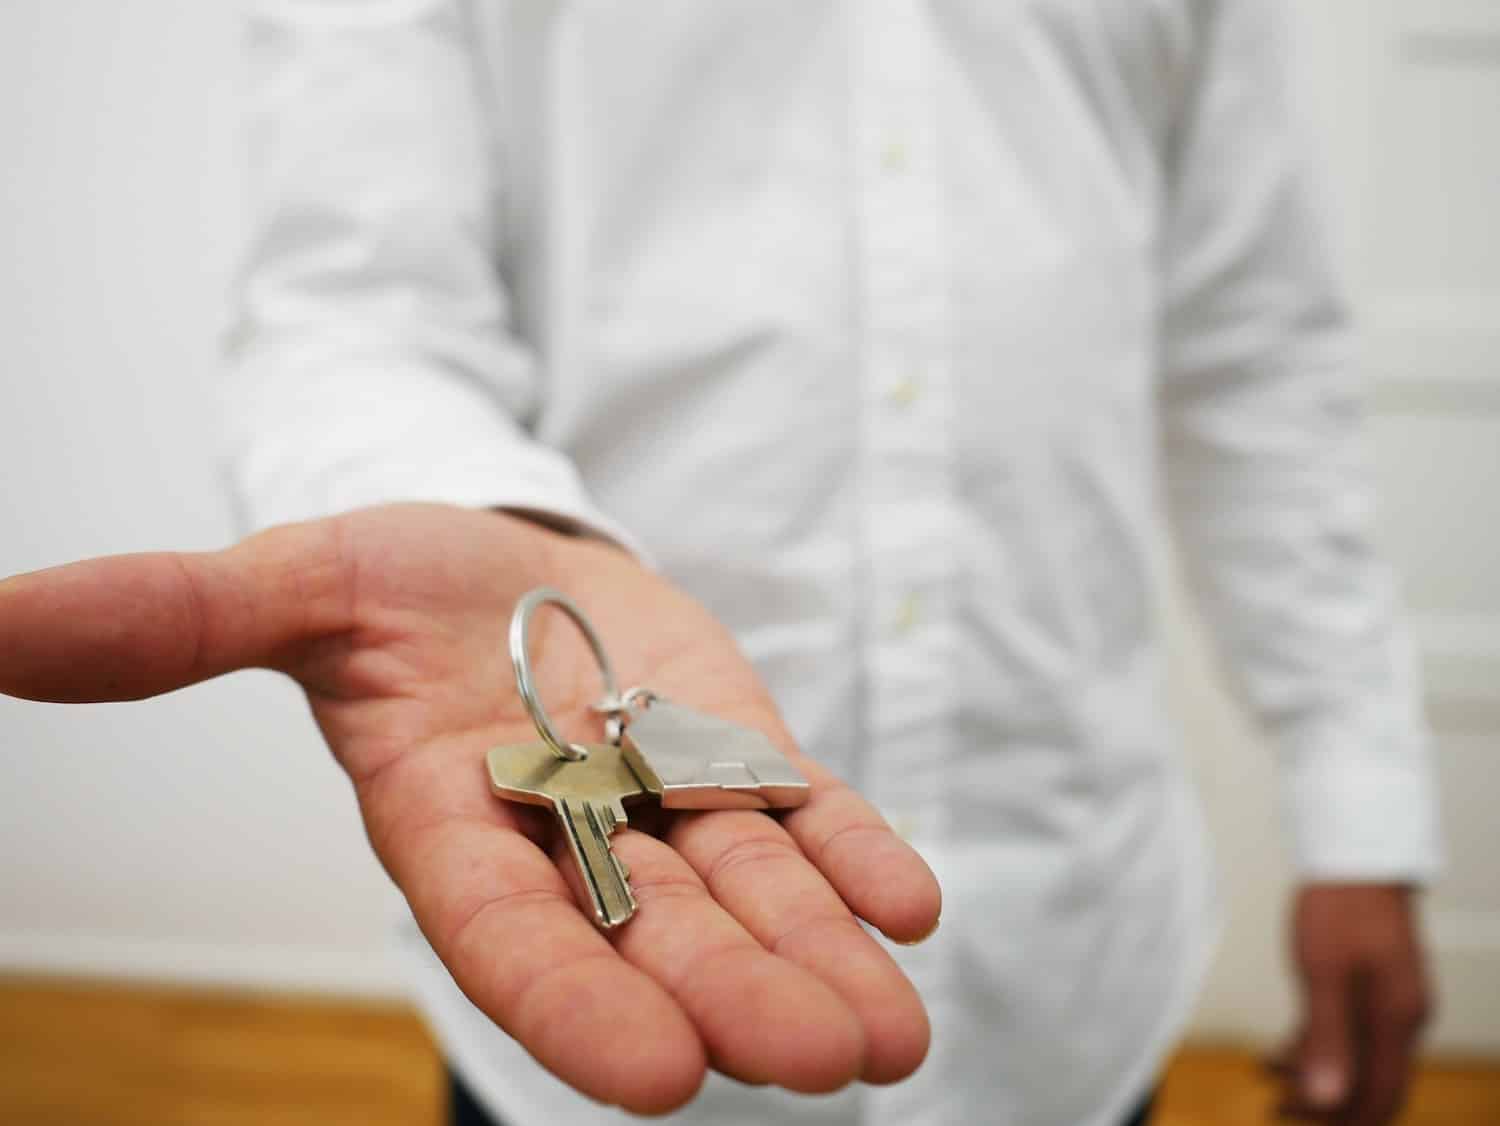 Person in white button-up extending hand toward camera, a house key with a house-shaped keychain in their palm